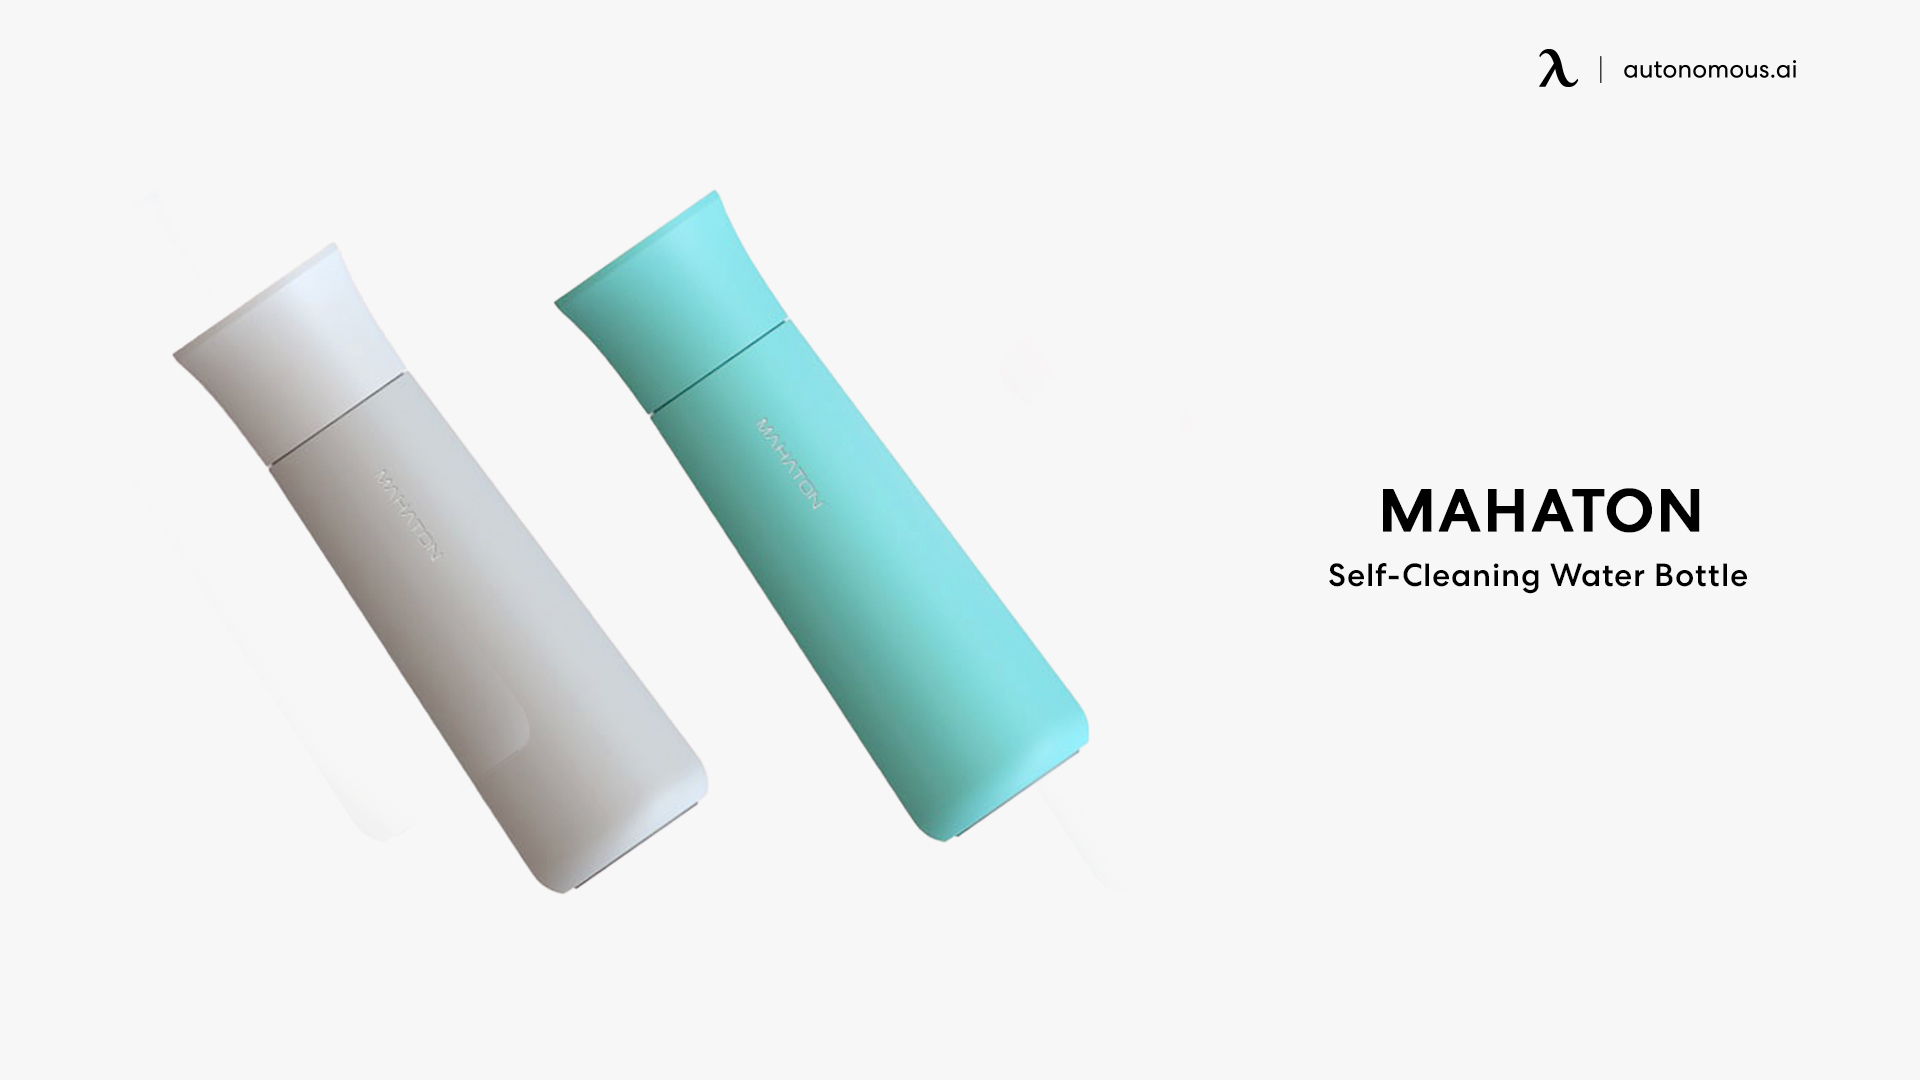 Mahaton Self-Cleaning Water Bottle